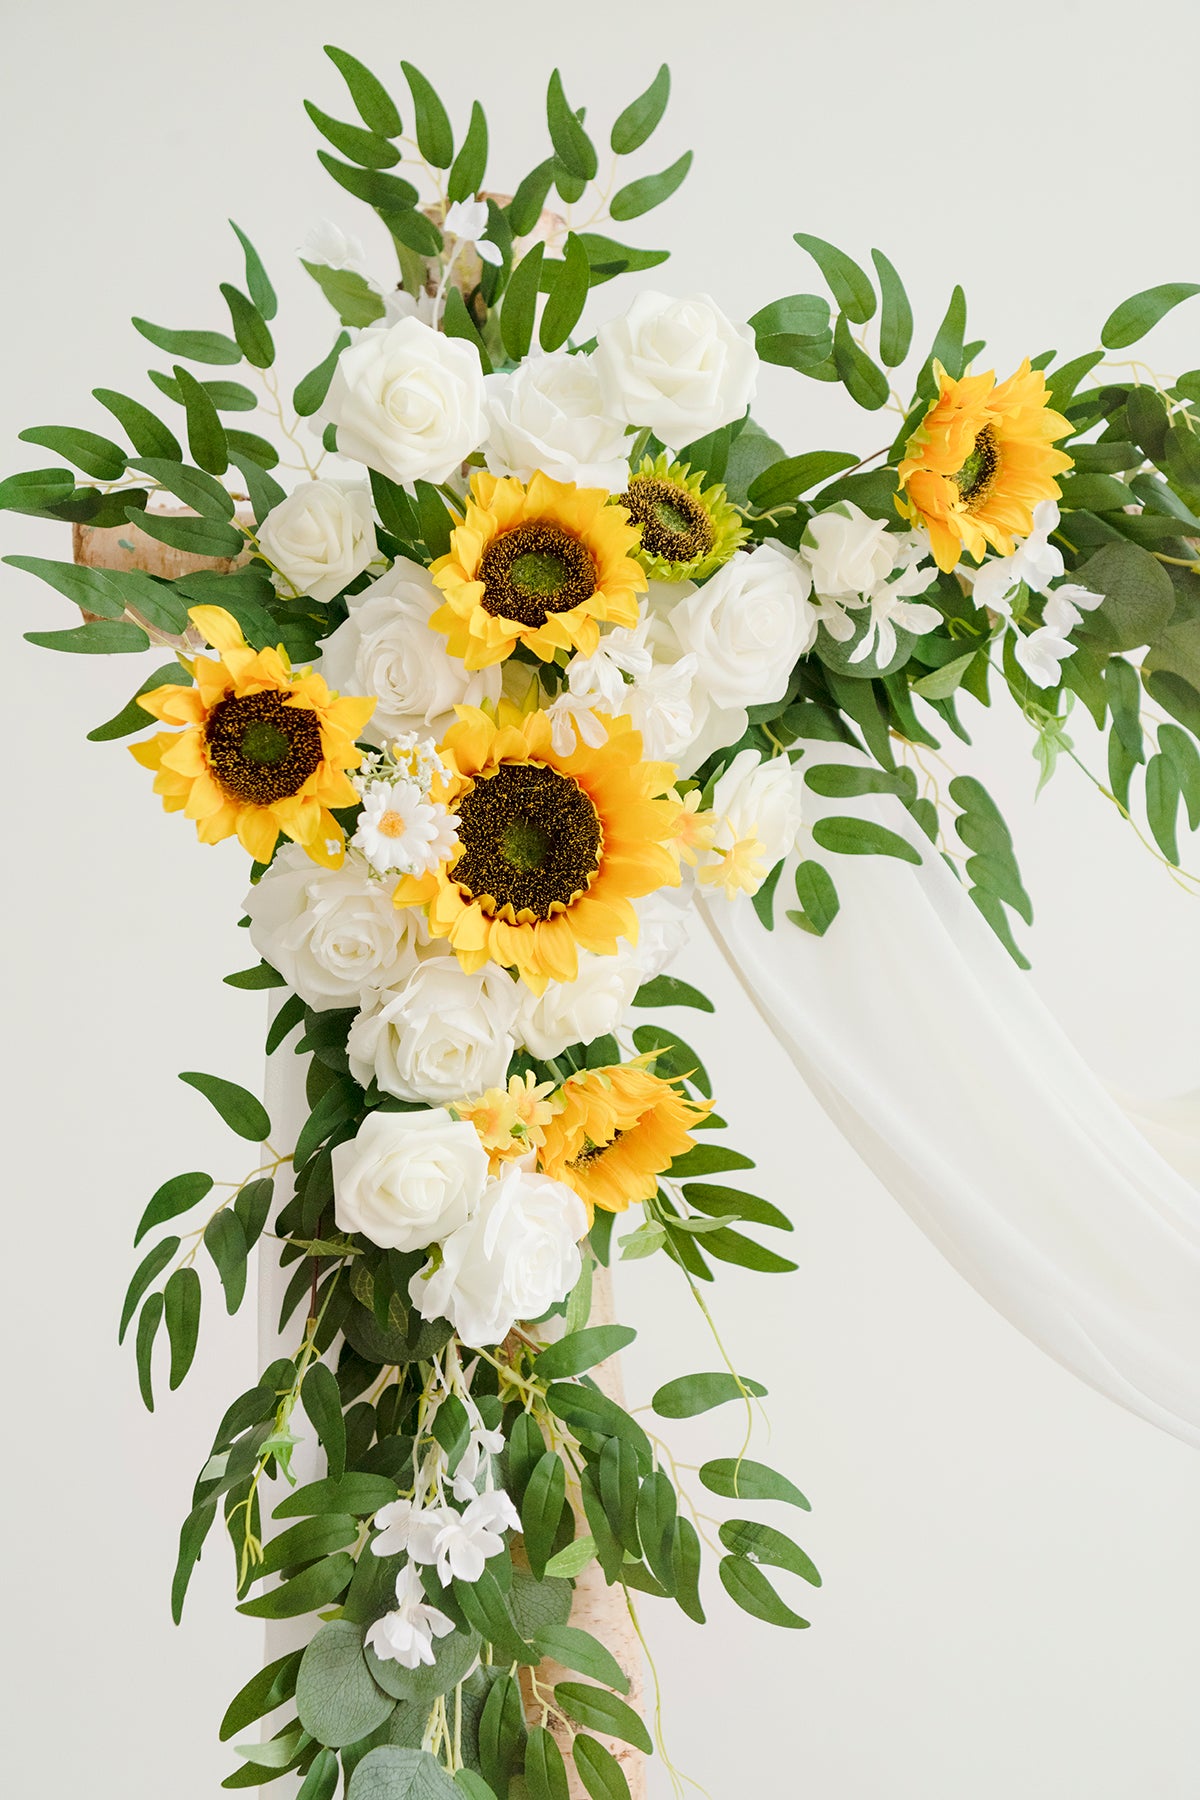 Flower Arch Decor with Drape in Bright Sunflower | Clearance